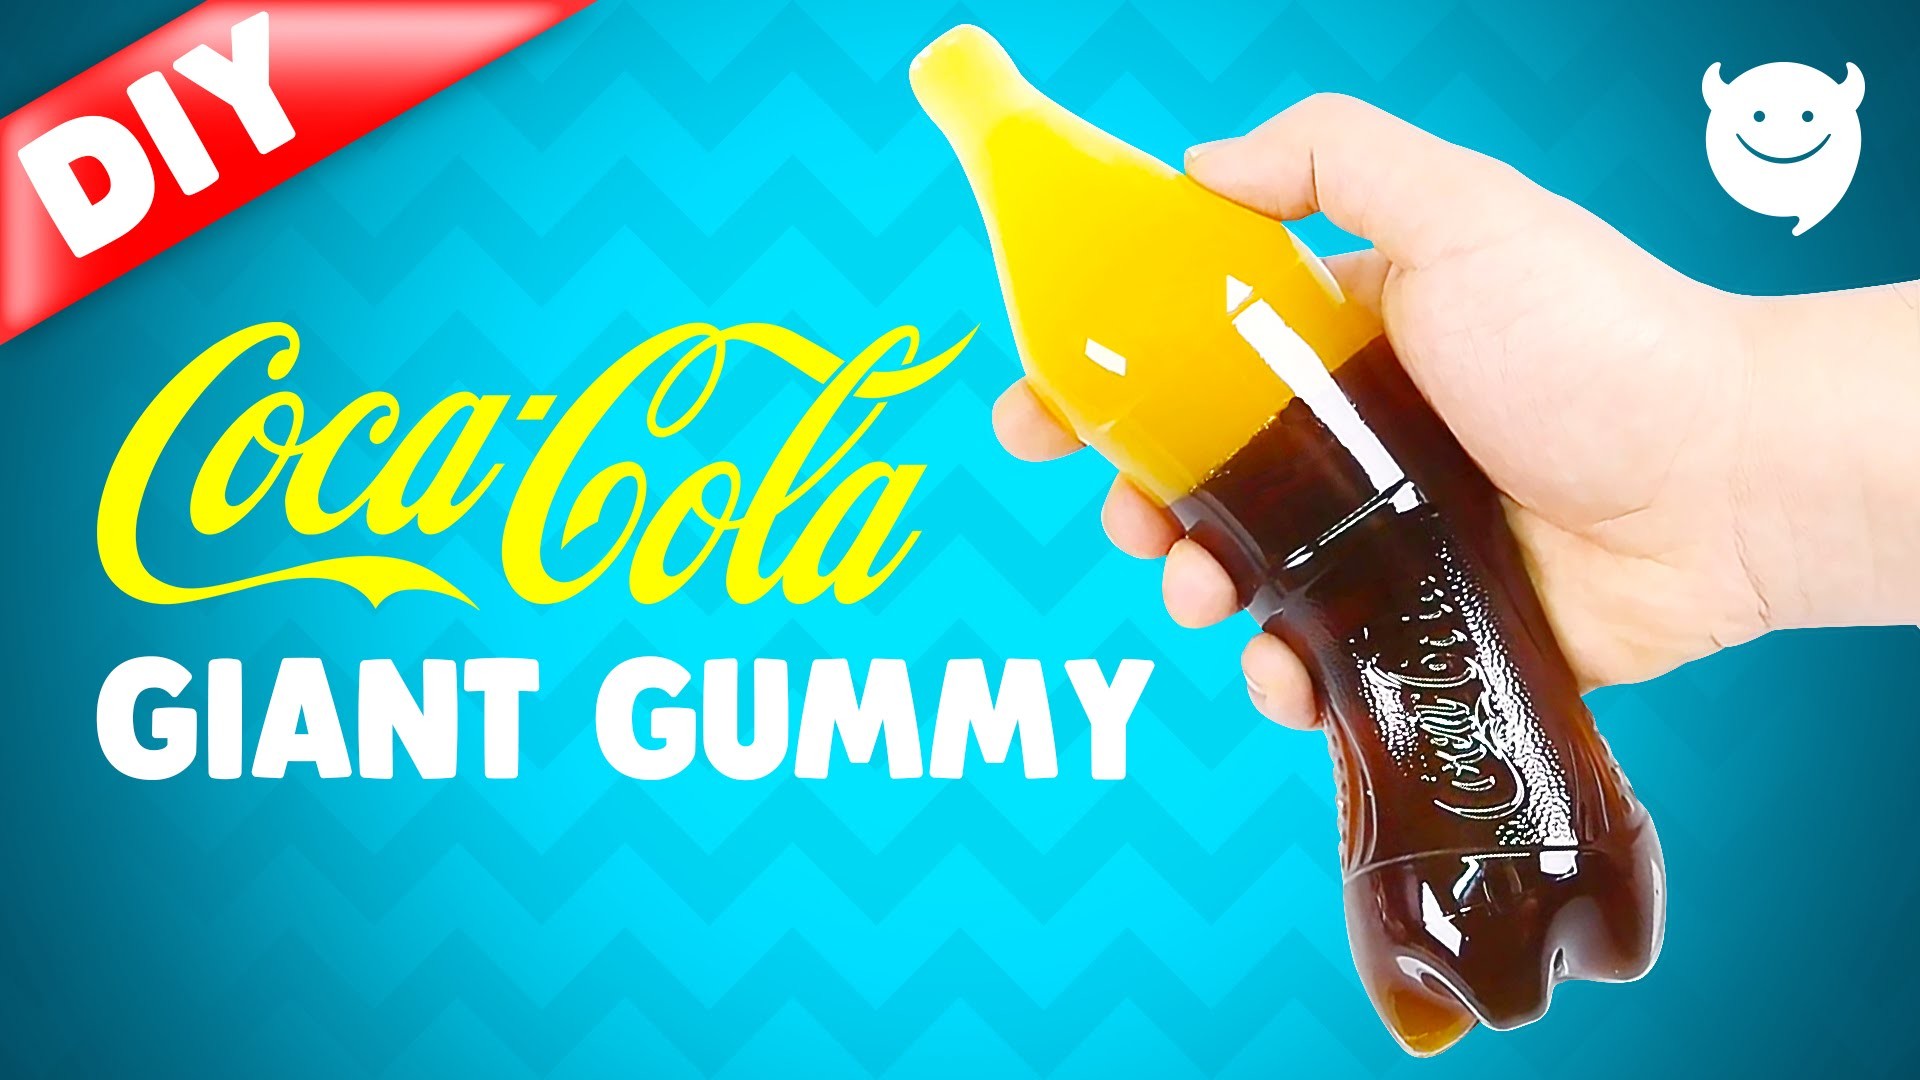 How To Make Giant Gummy Cola Bottle !! DIY Coca-cola Jelly